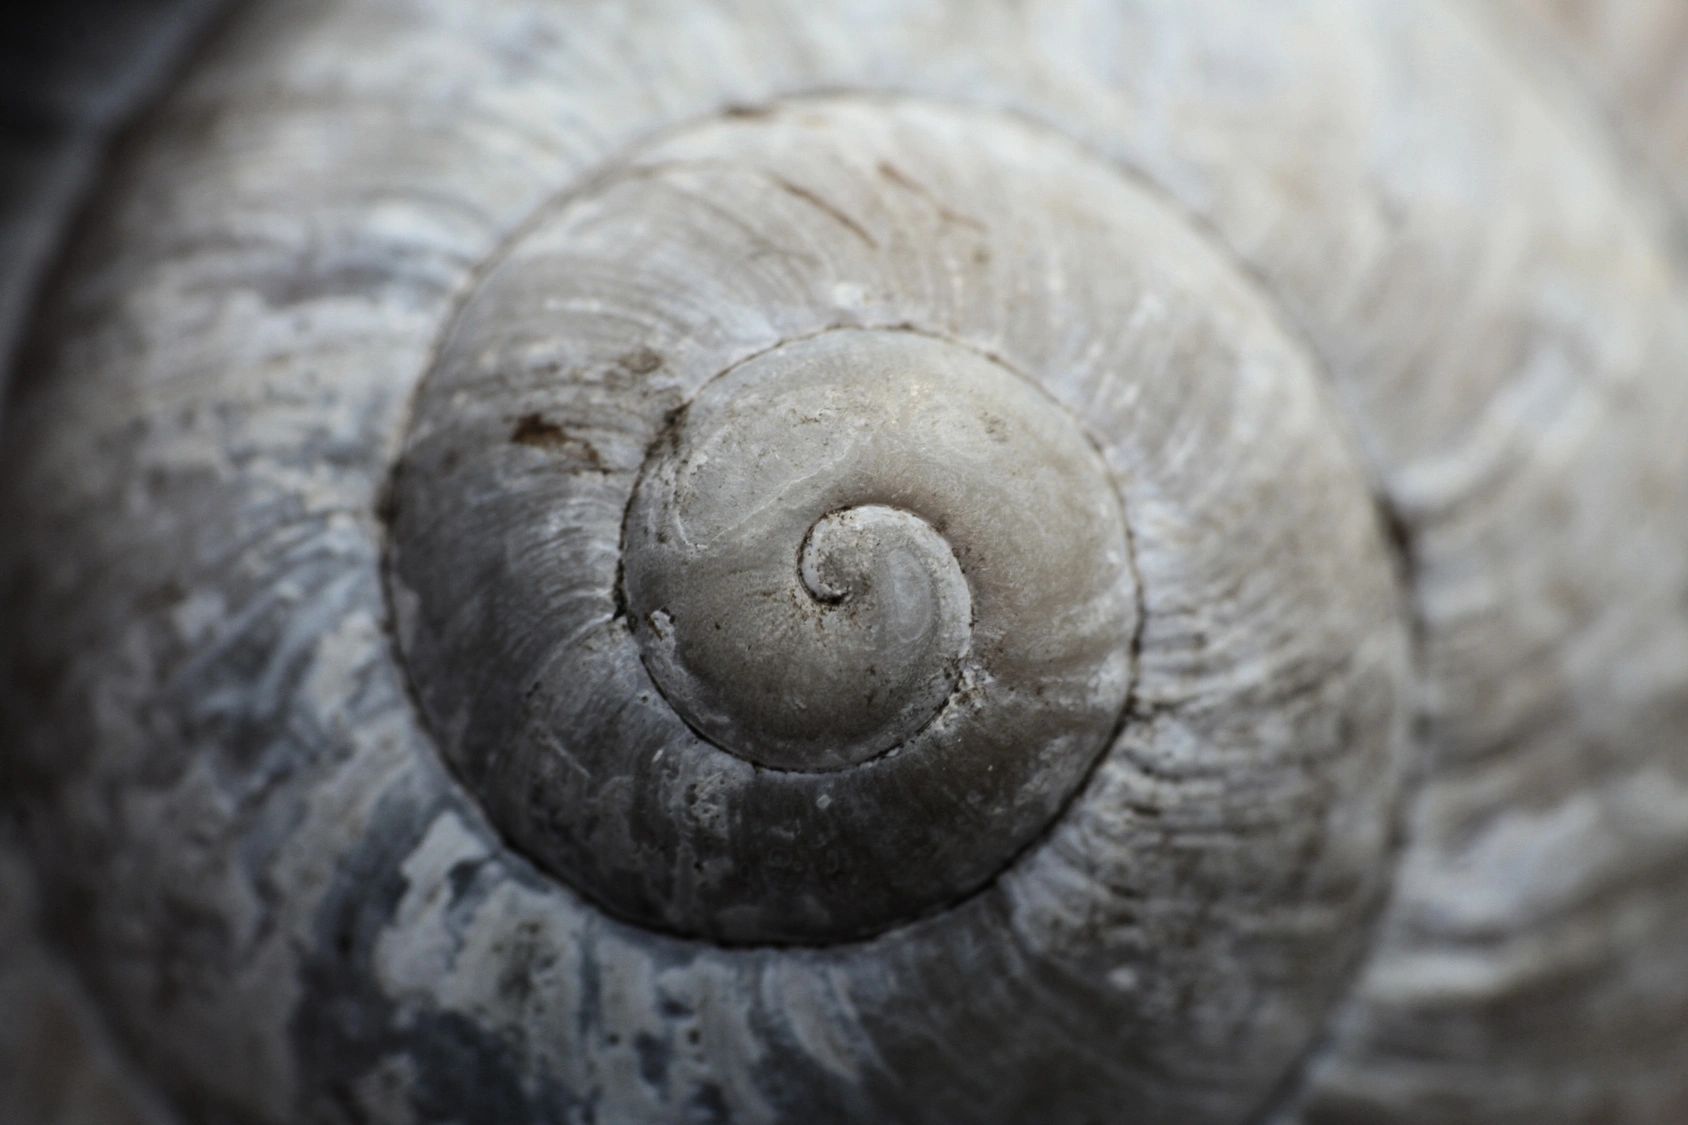 A spiral shell with grey and blue coloring 